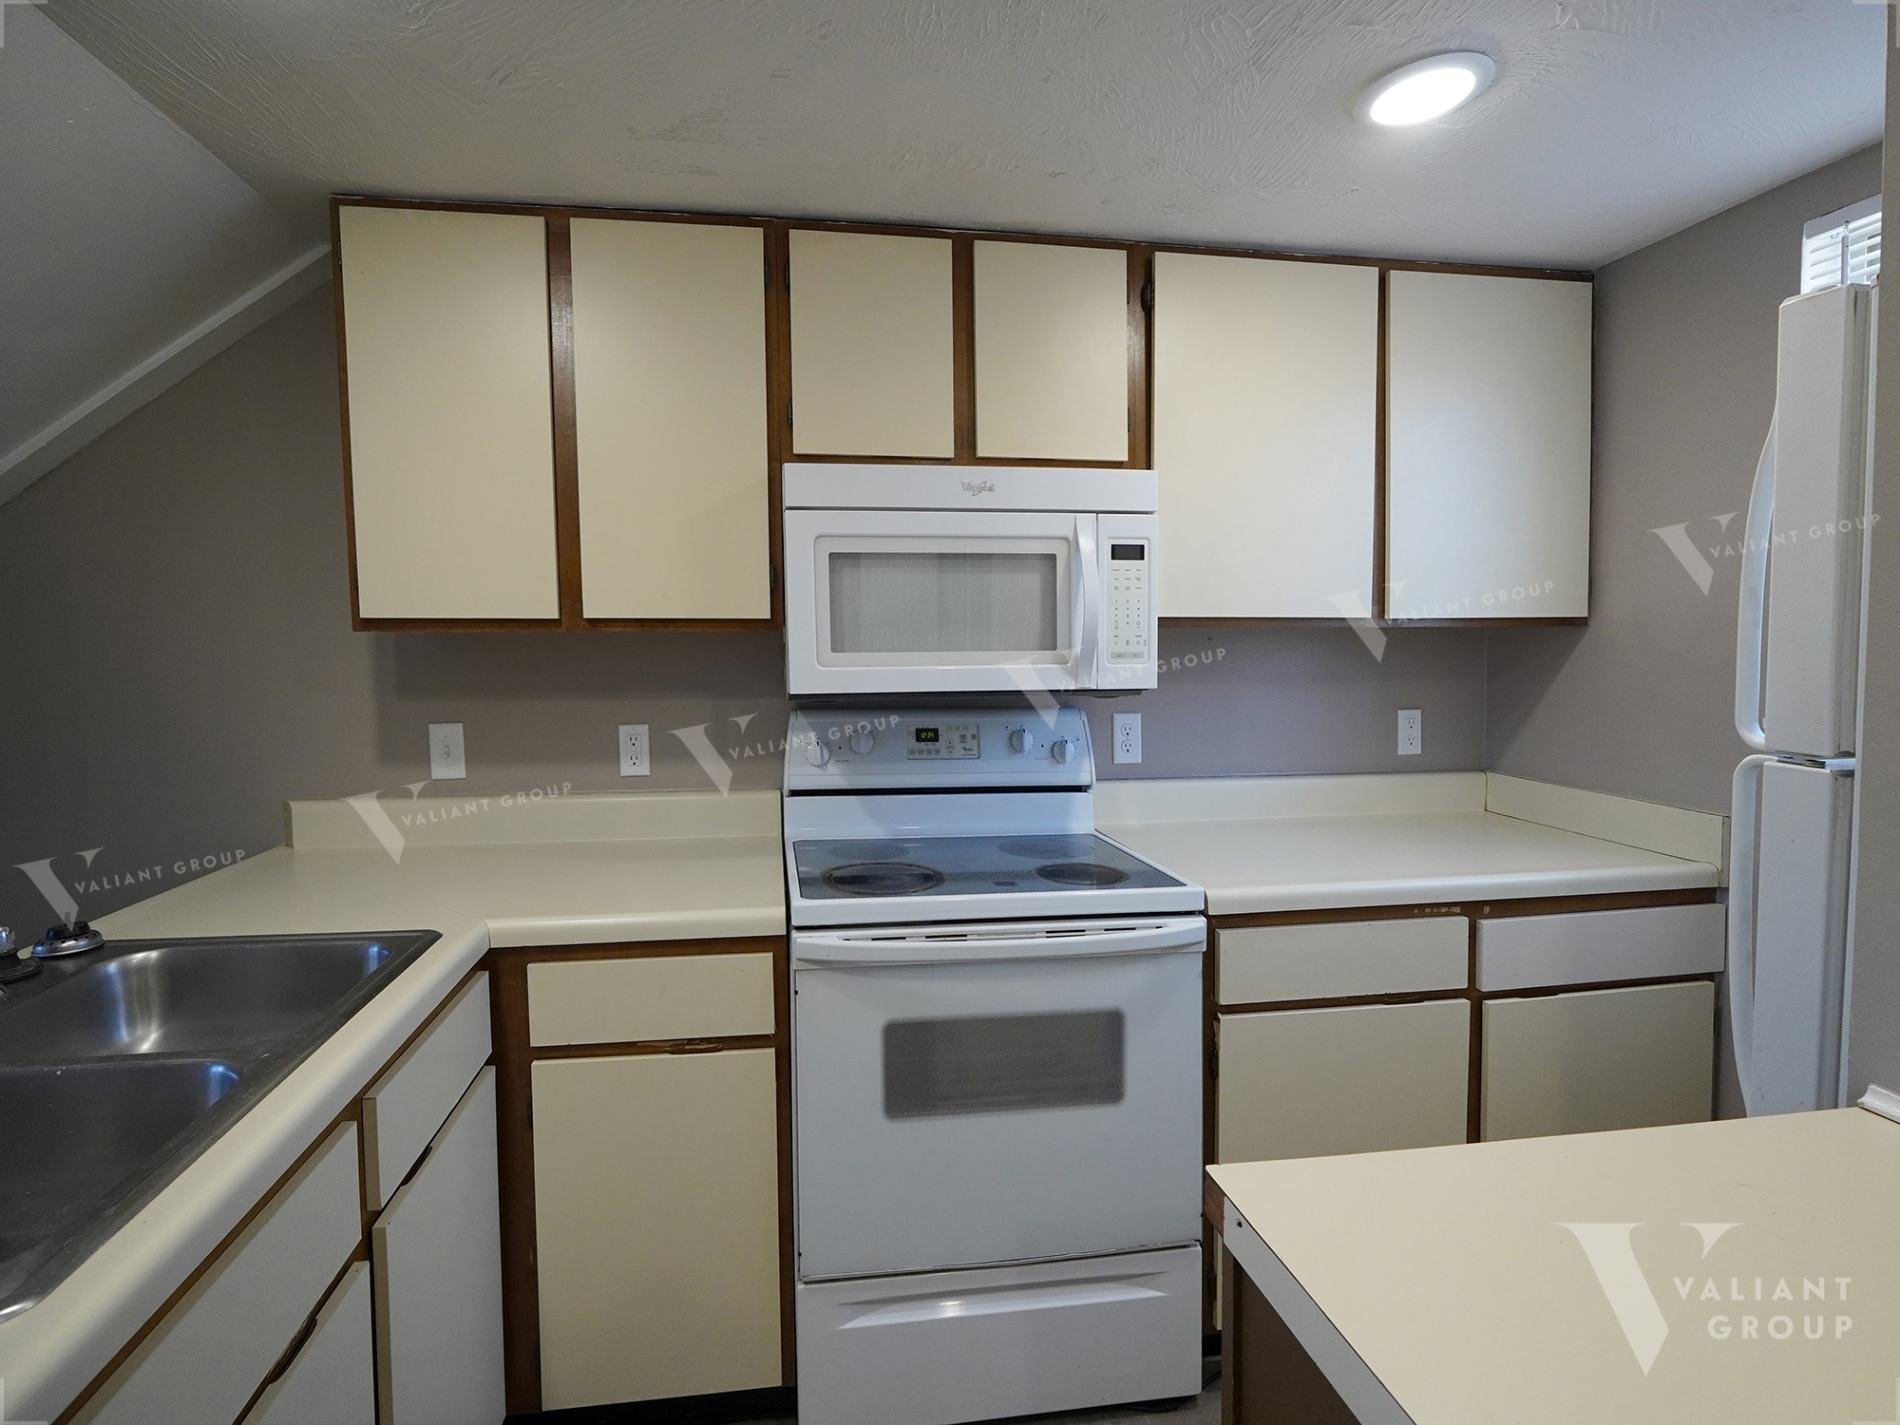 Apartment-Townhome-2323-E-Cherry-St-Springfield-04-Kitchen-Cabinets.jpg